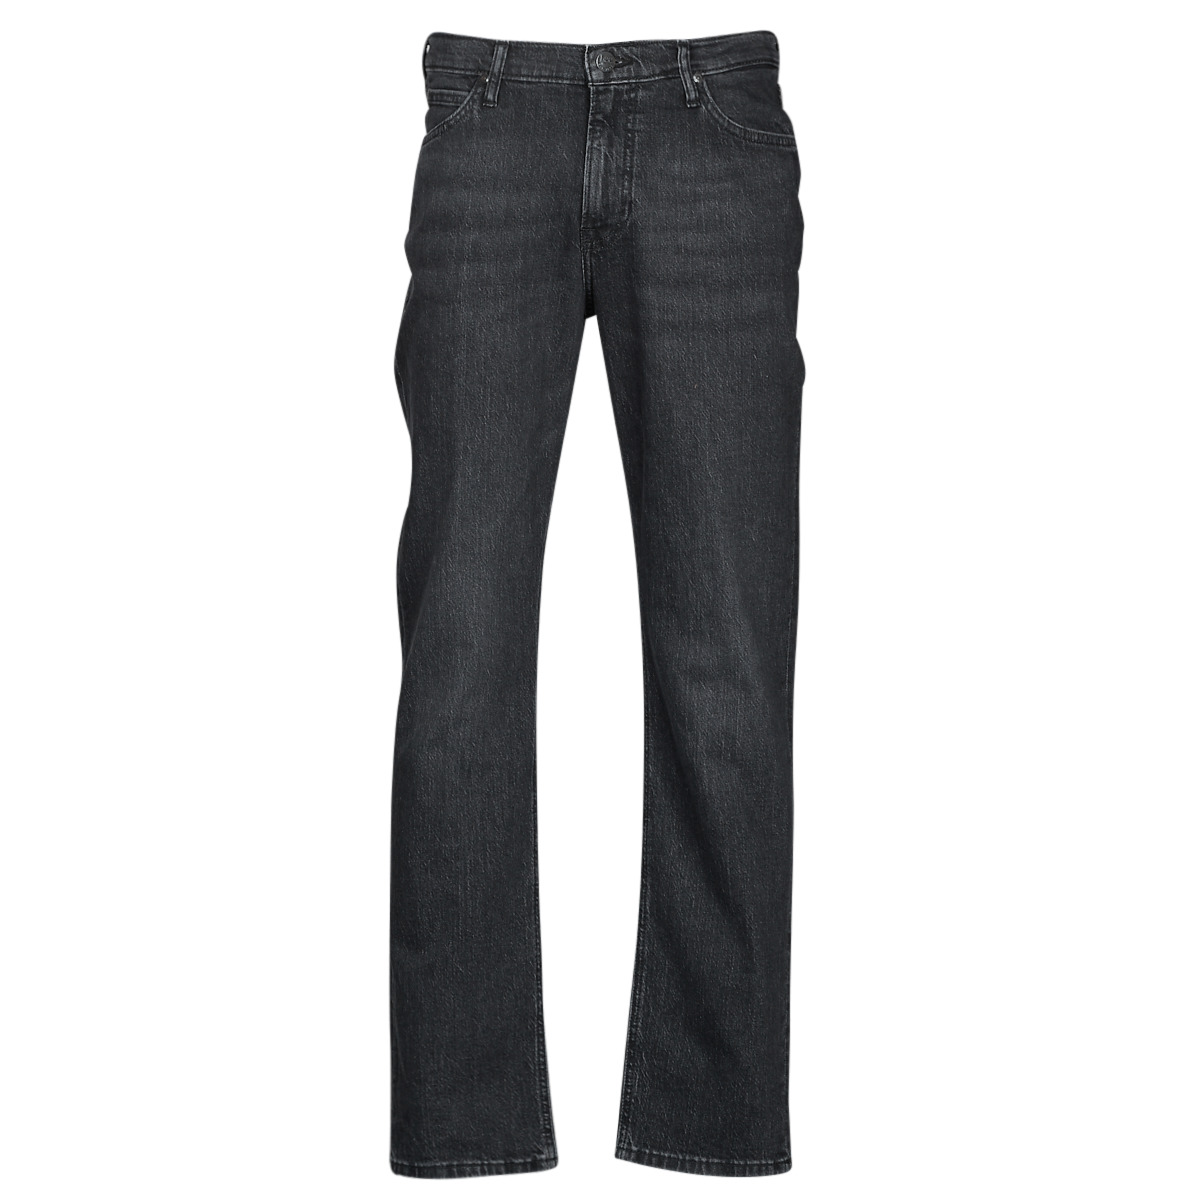 Lee WEST | straight jeans Spartoo NET delivery ! Men Rock Clothing - Free 